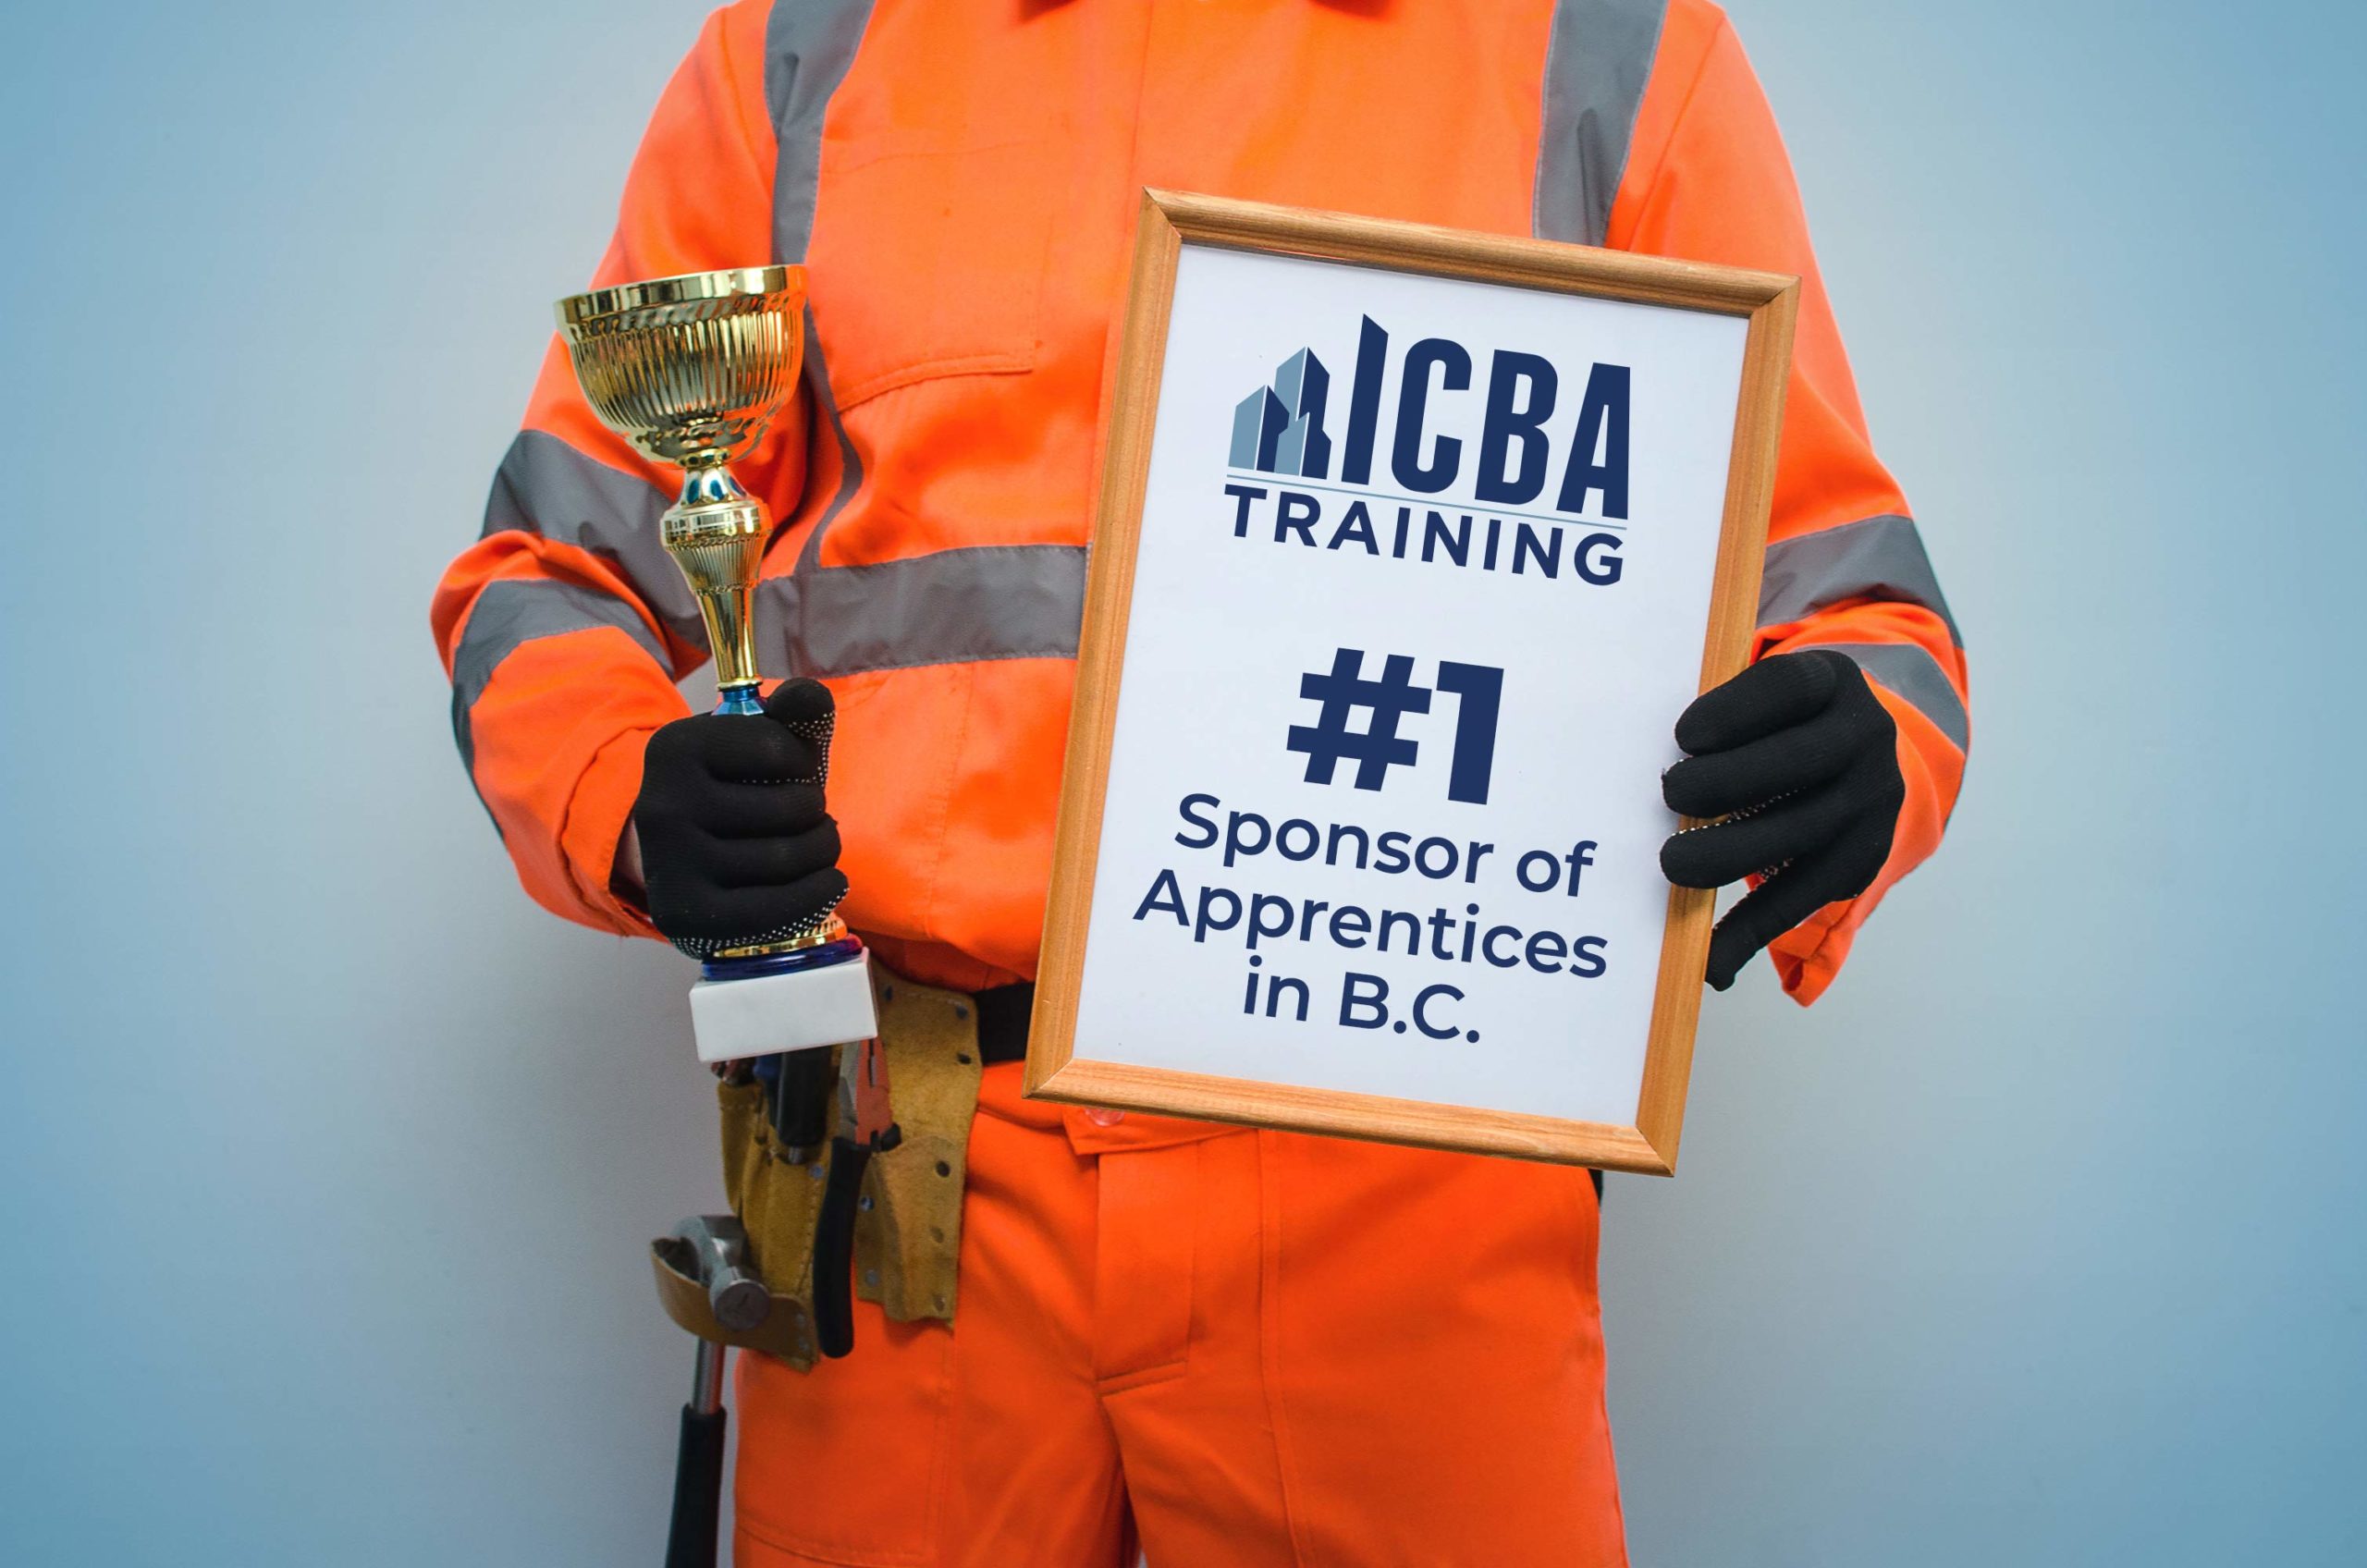 ICBA NEWS: ICBA Trains More B.C. Apprentices Than Anyone Else